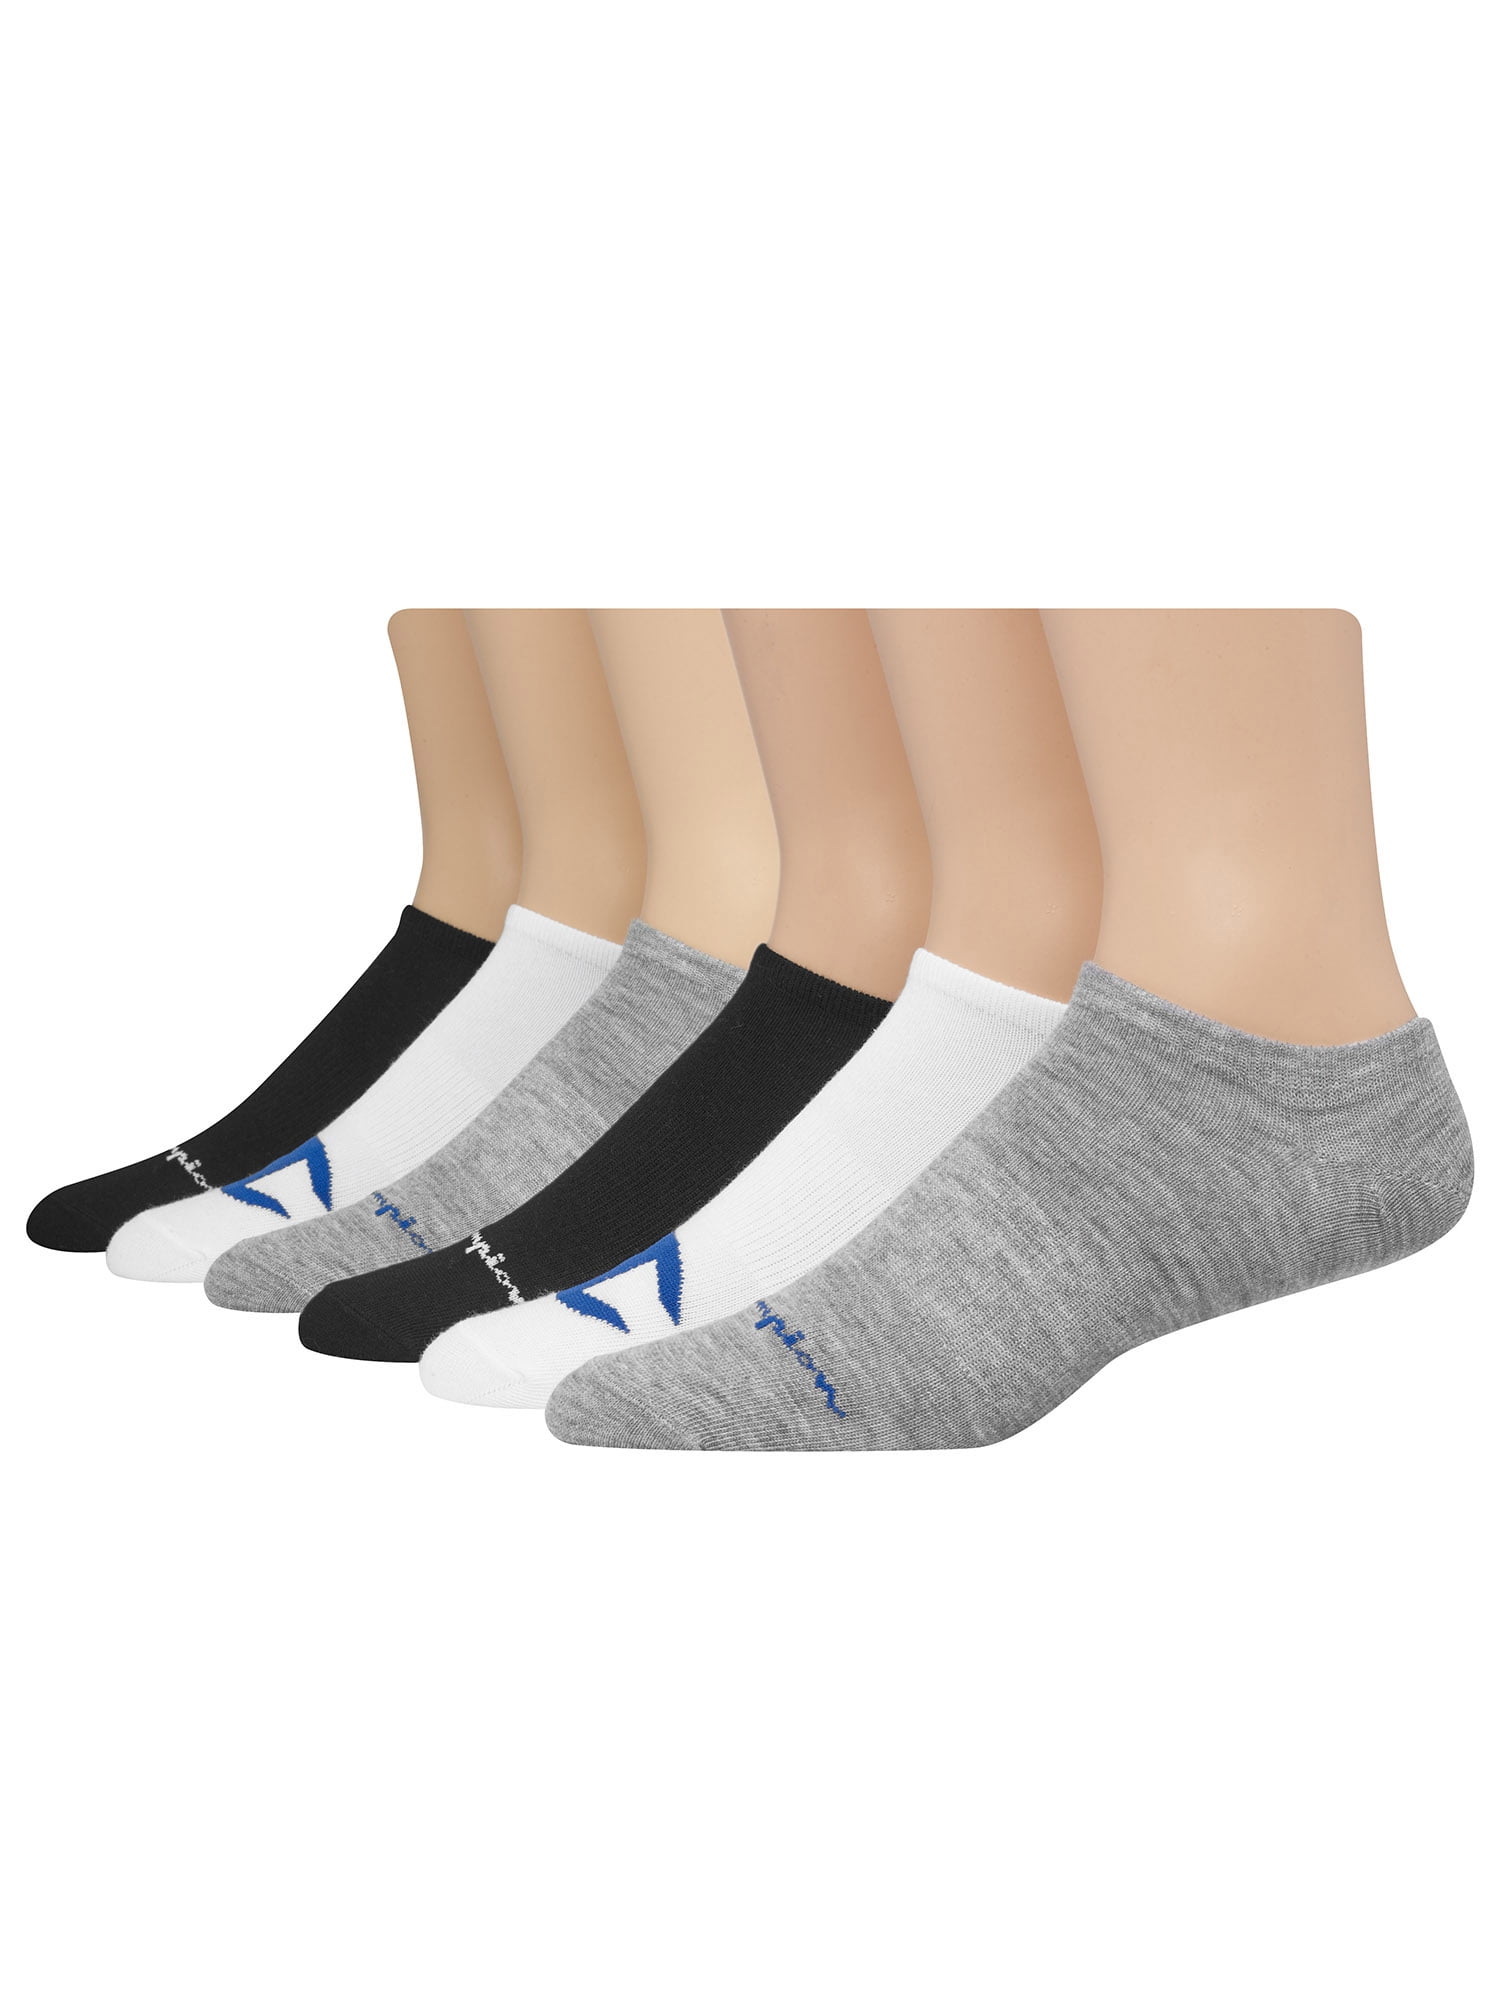 Details about   Ankle Compression Socks Men Women Athletic Sports Soccer Football Cycling 1 Pair 